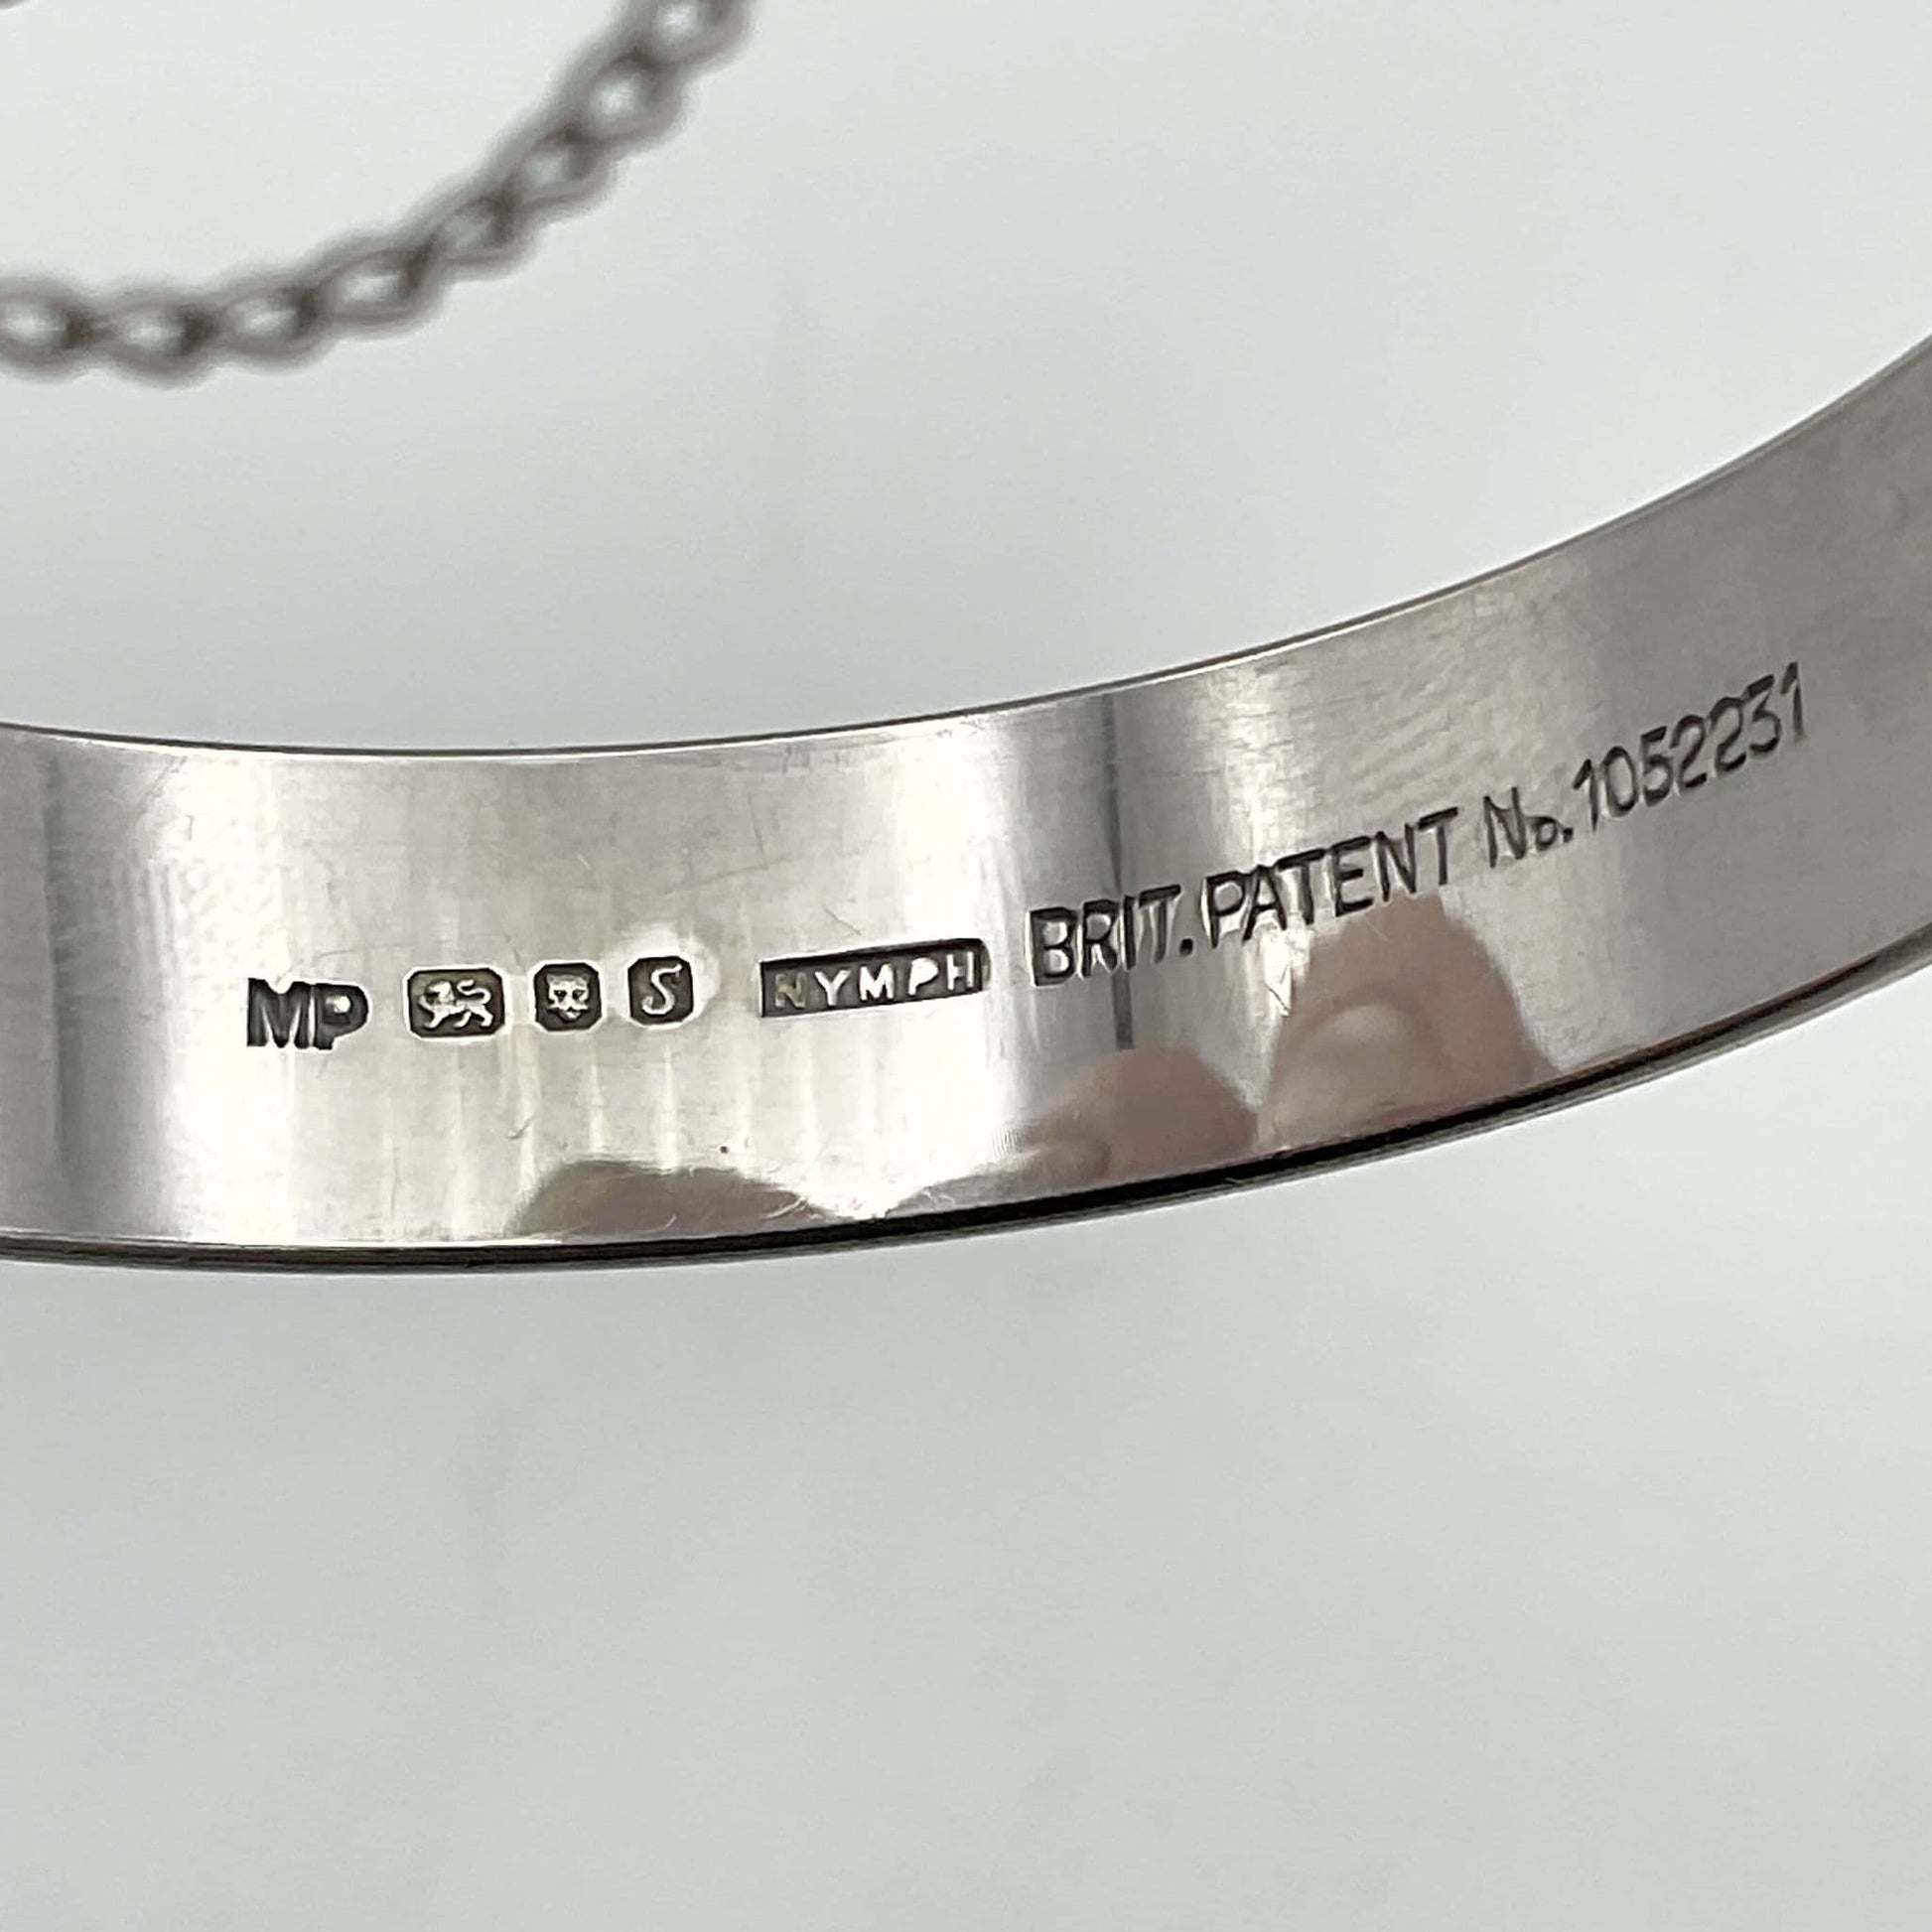 Hallmarks, maker’s mark, Nymph and Brit Patent no 1052231 imprinted on the inside of the bracelet 